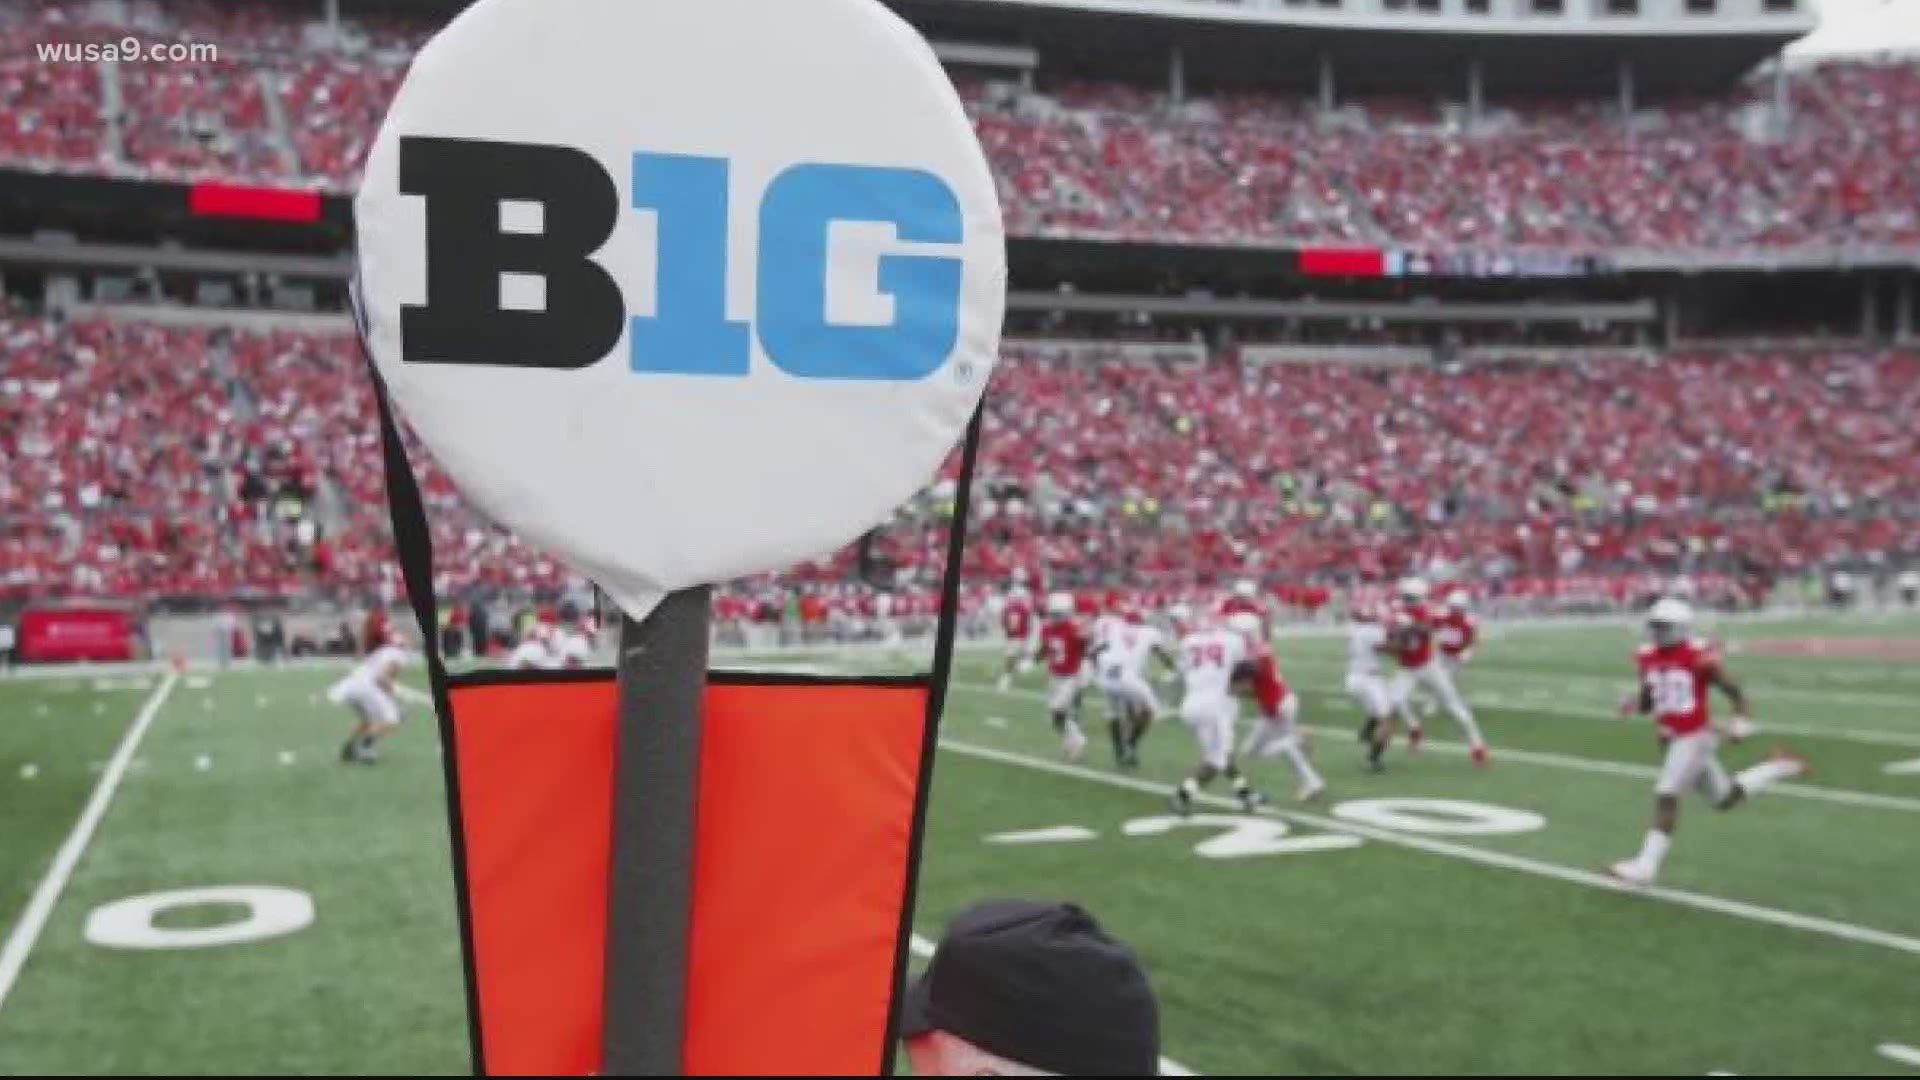 According to The Detroit Free Press, the Big Ten has voted to cancel its 2020 college football season.